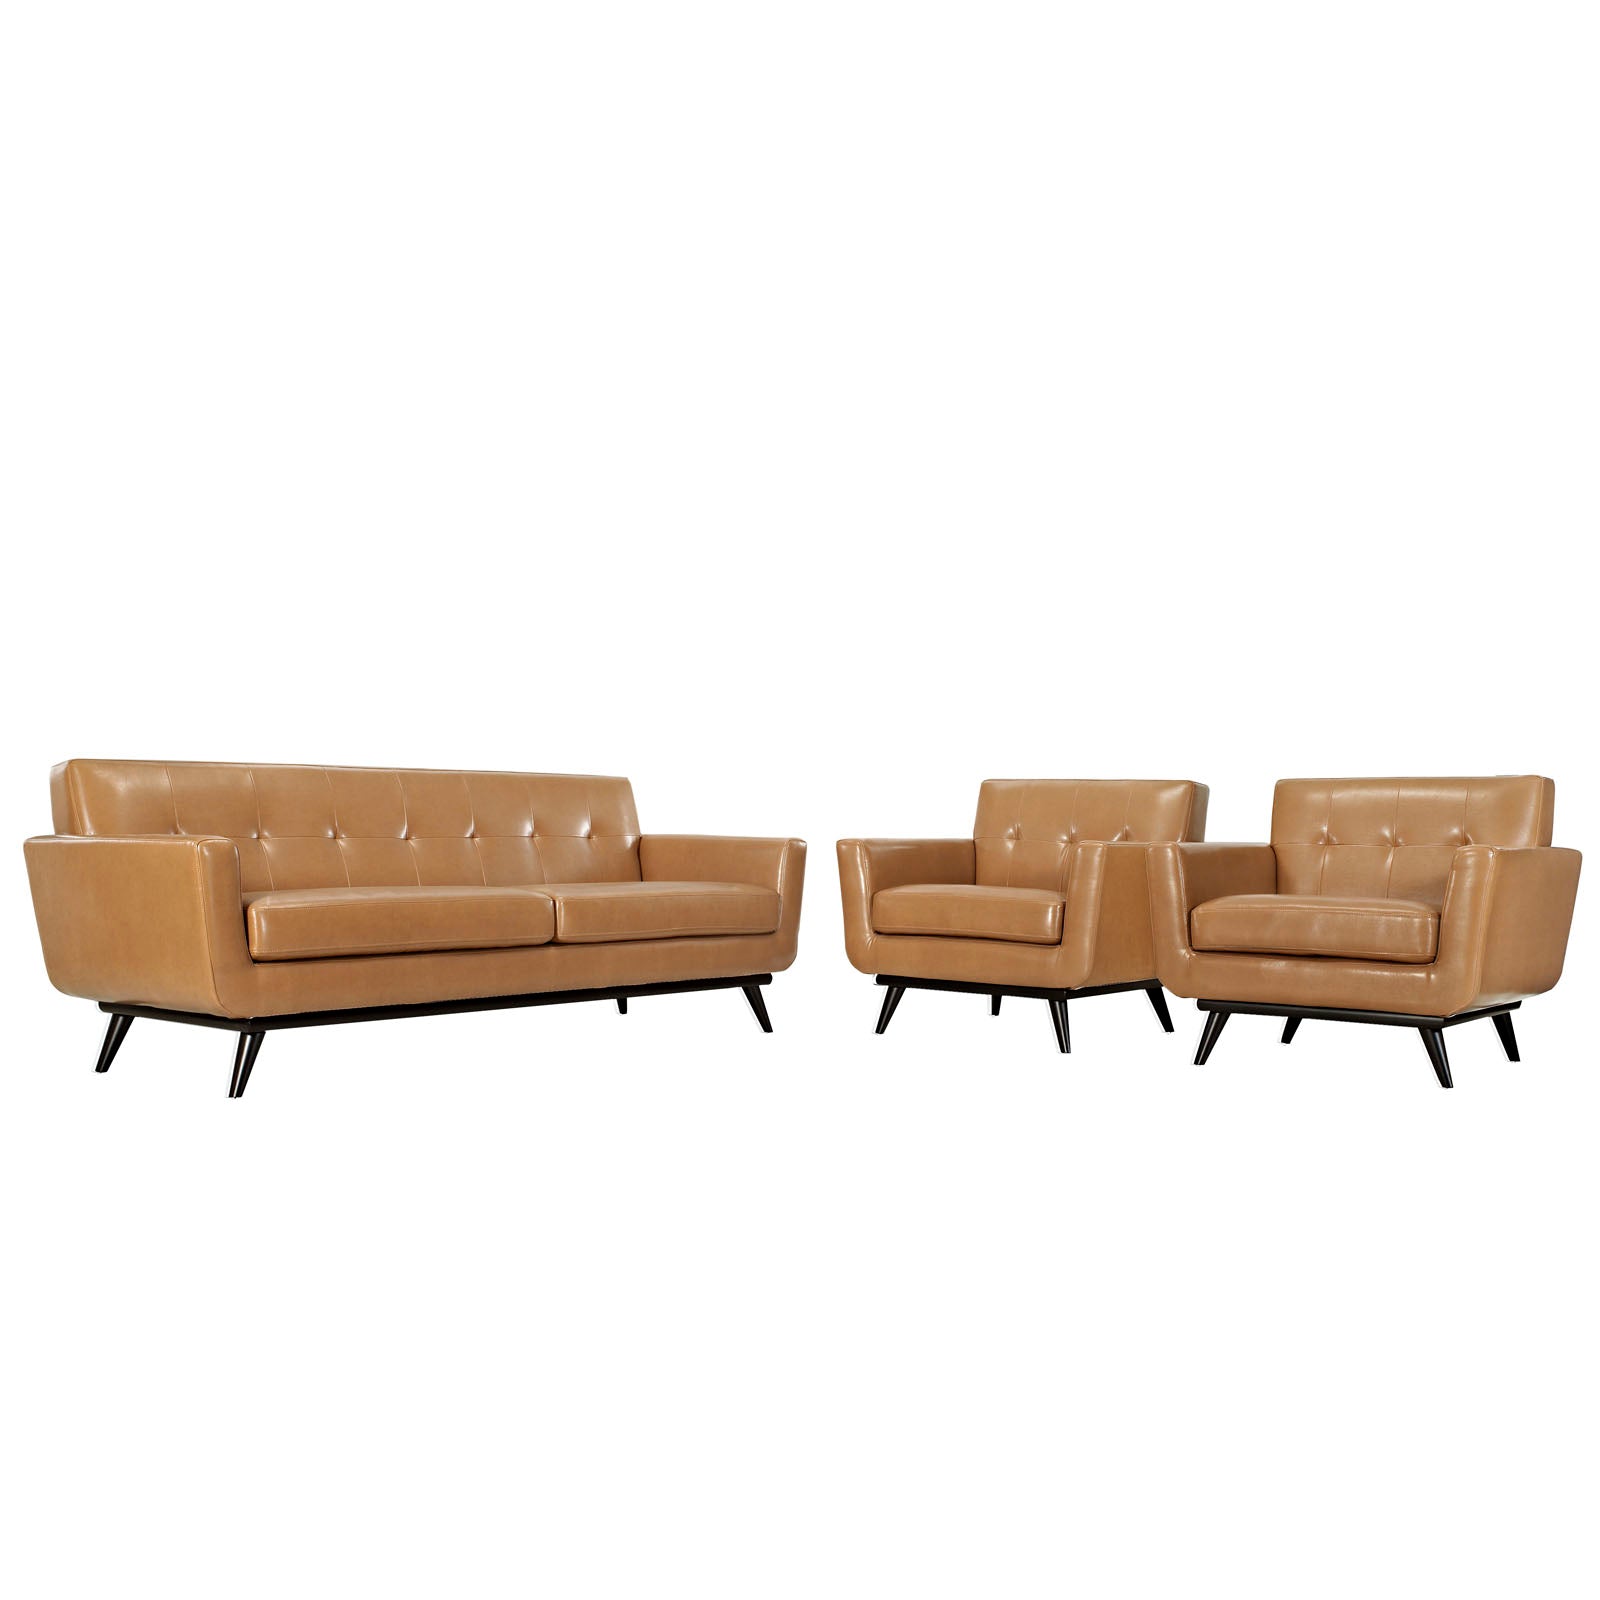 Engage 3 Piece Leather Living Room Set - East Shore Modern Home Furnishings